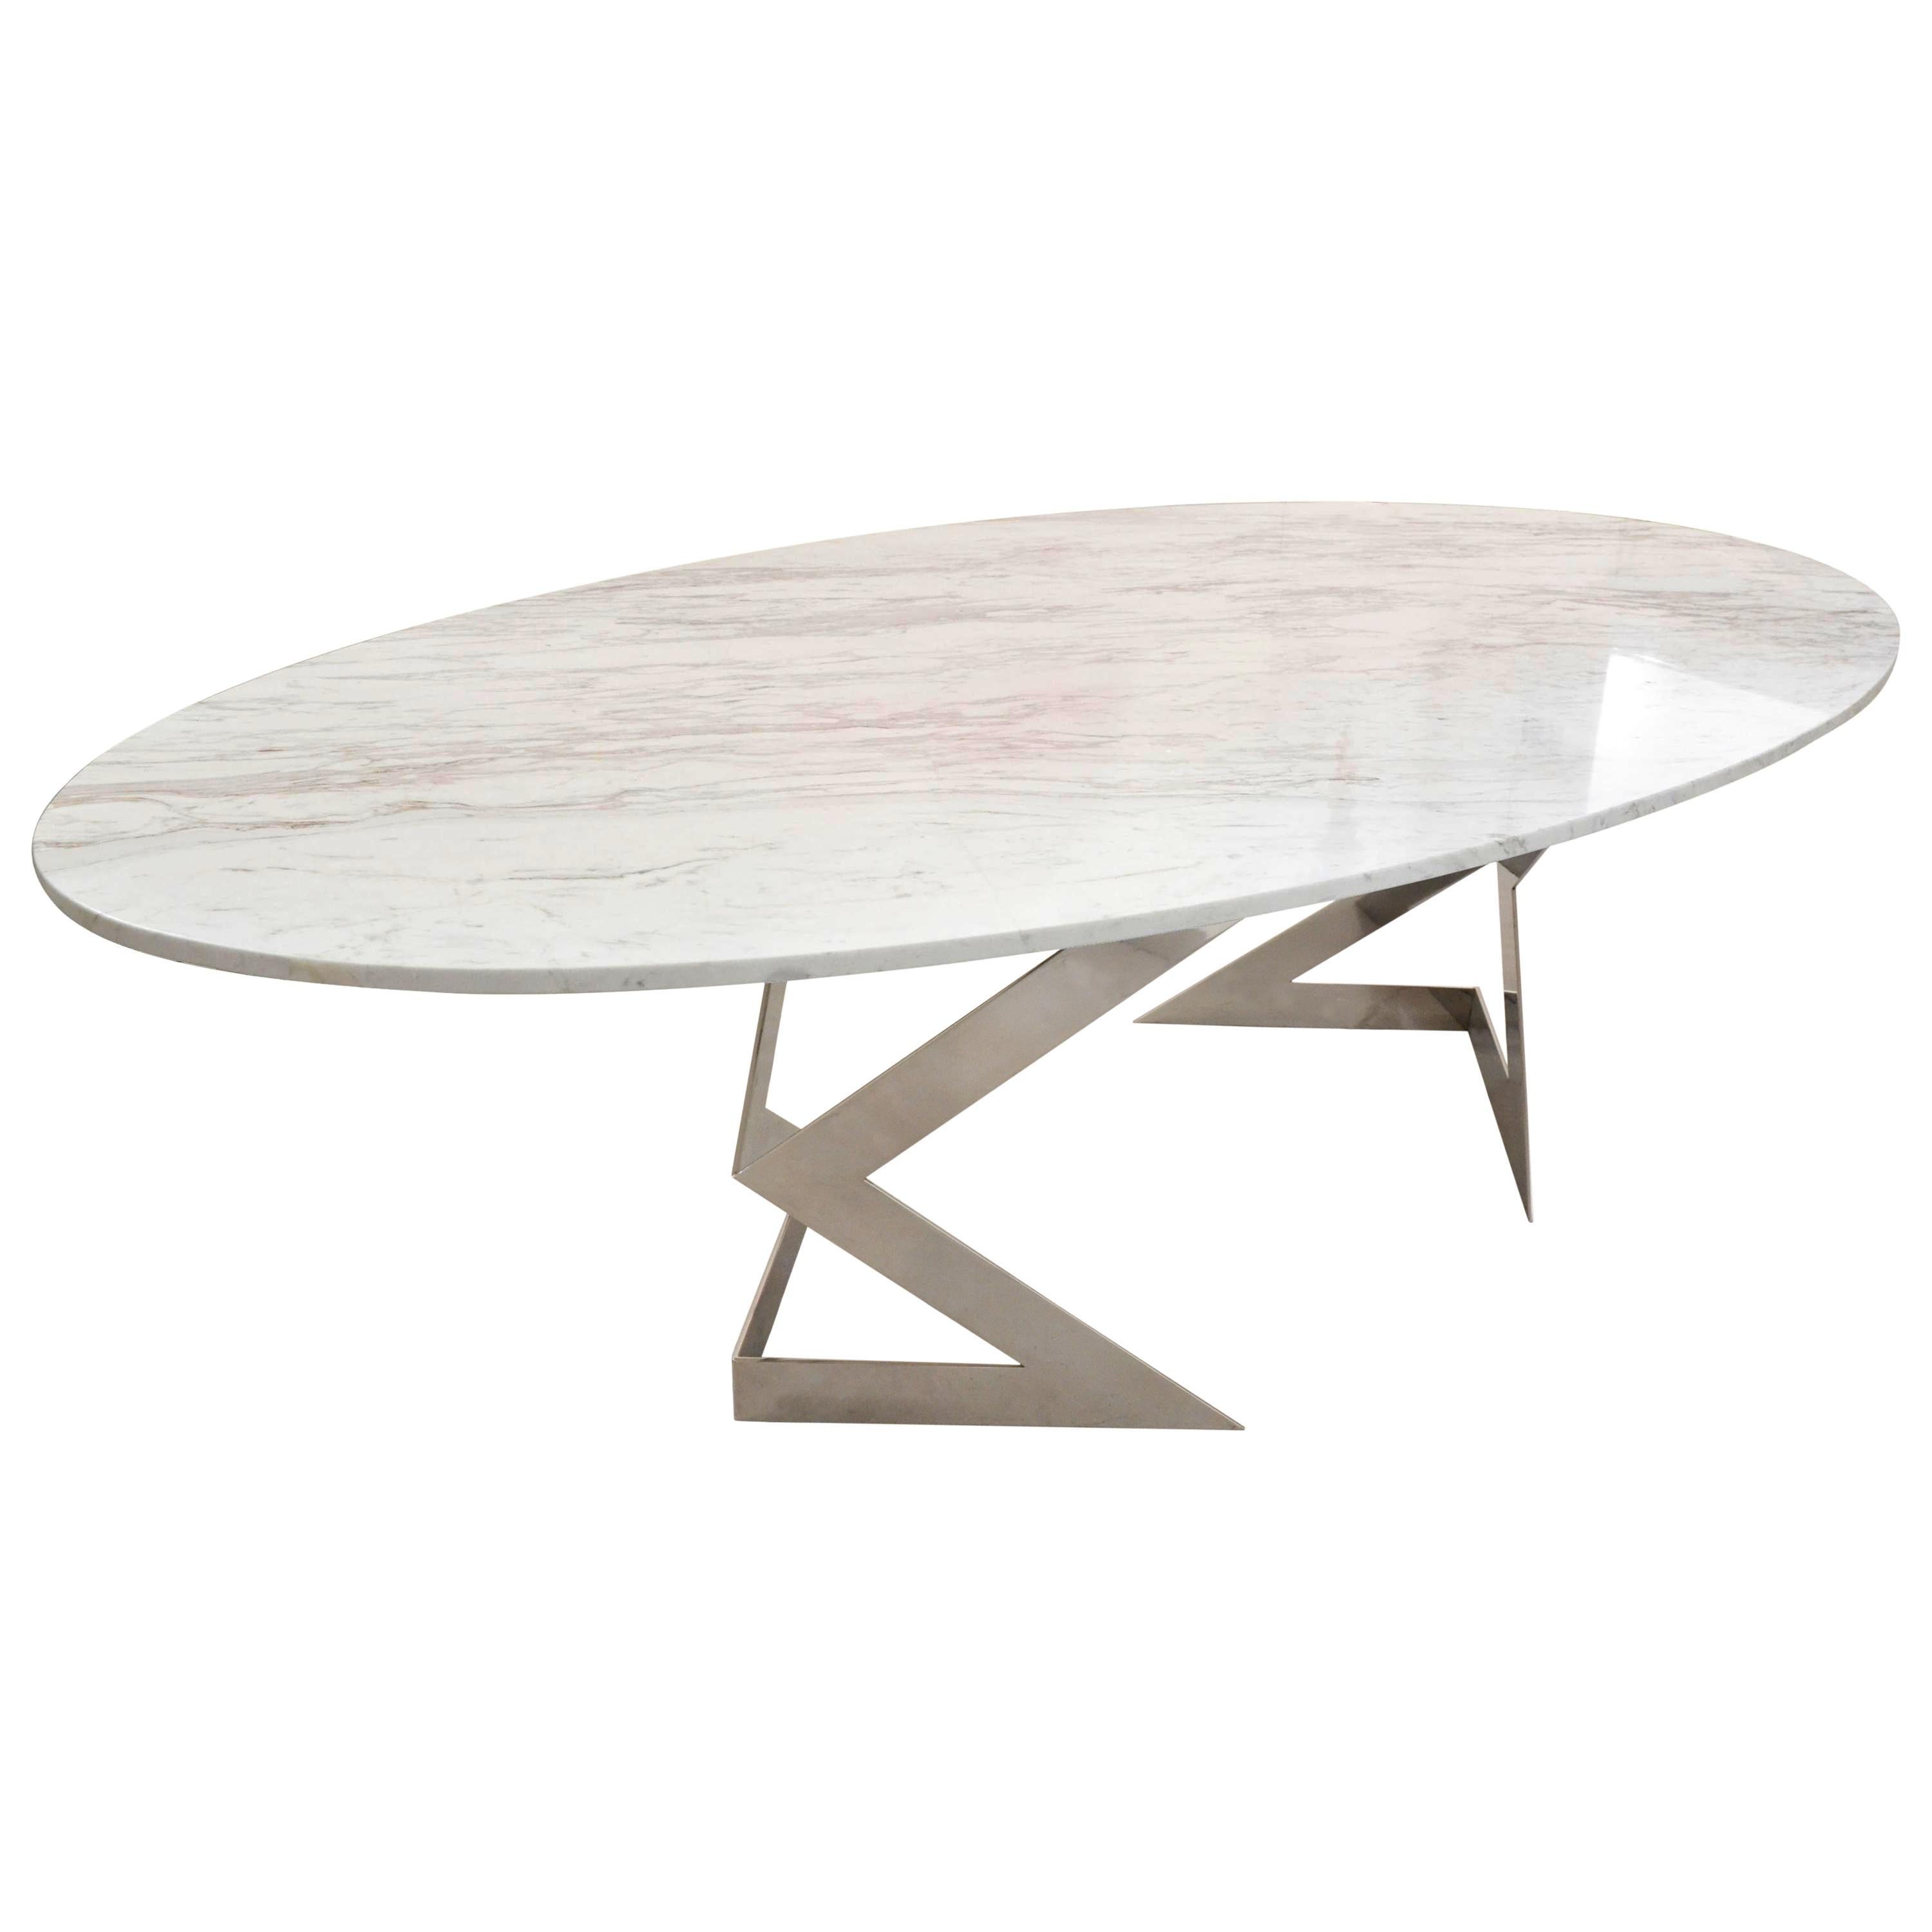 'Ivory Diamond' 10 Seater Oval Dining Table in Greek White Marble For Sale